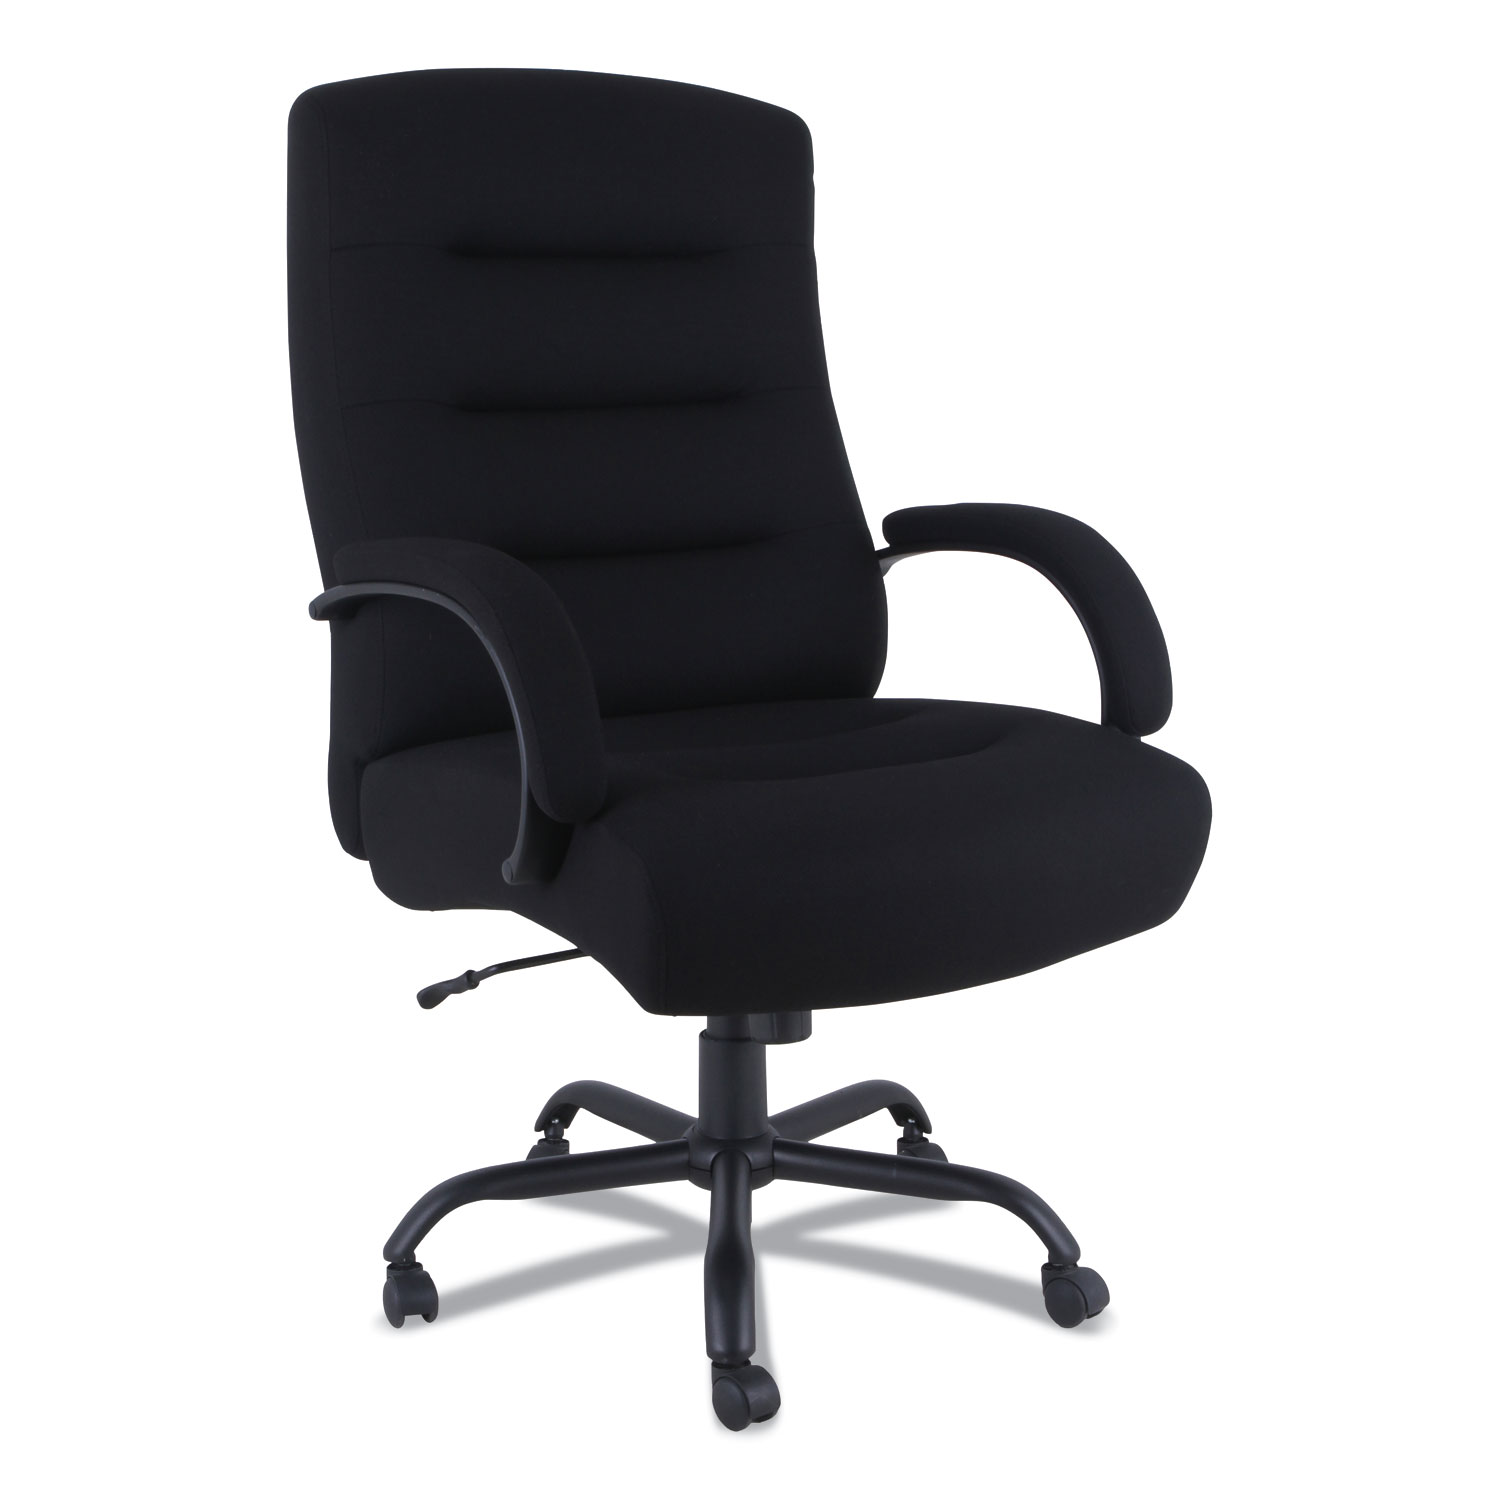  Alera 12010-00 Alera Kesson Series Big and Tall Office Chair, 25.4 Seat Height, Supports up to 450 lbs., Black Seat/Black Back, Black Base (ALEKS4510) 